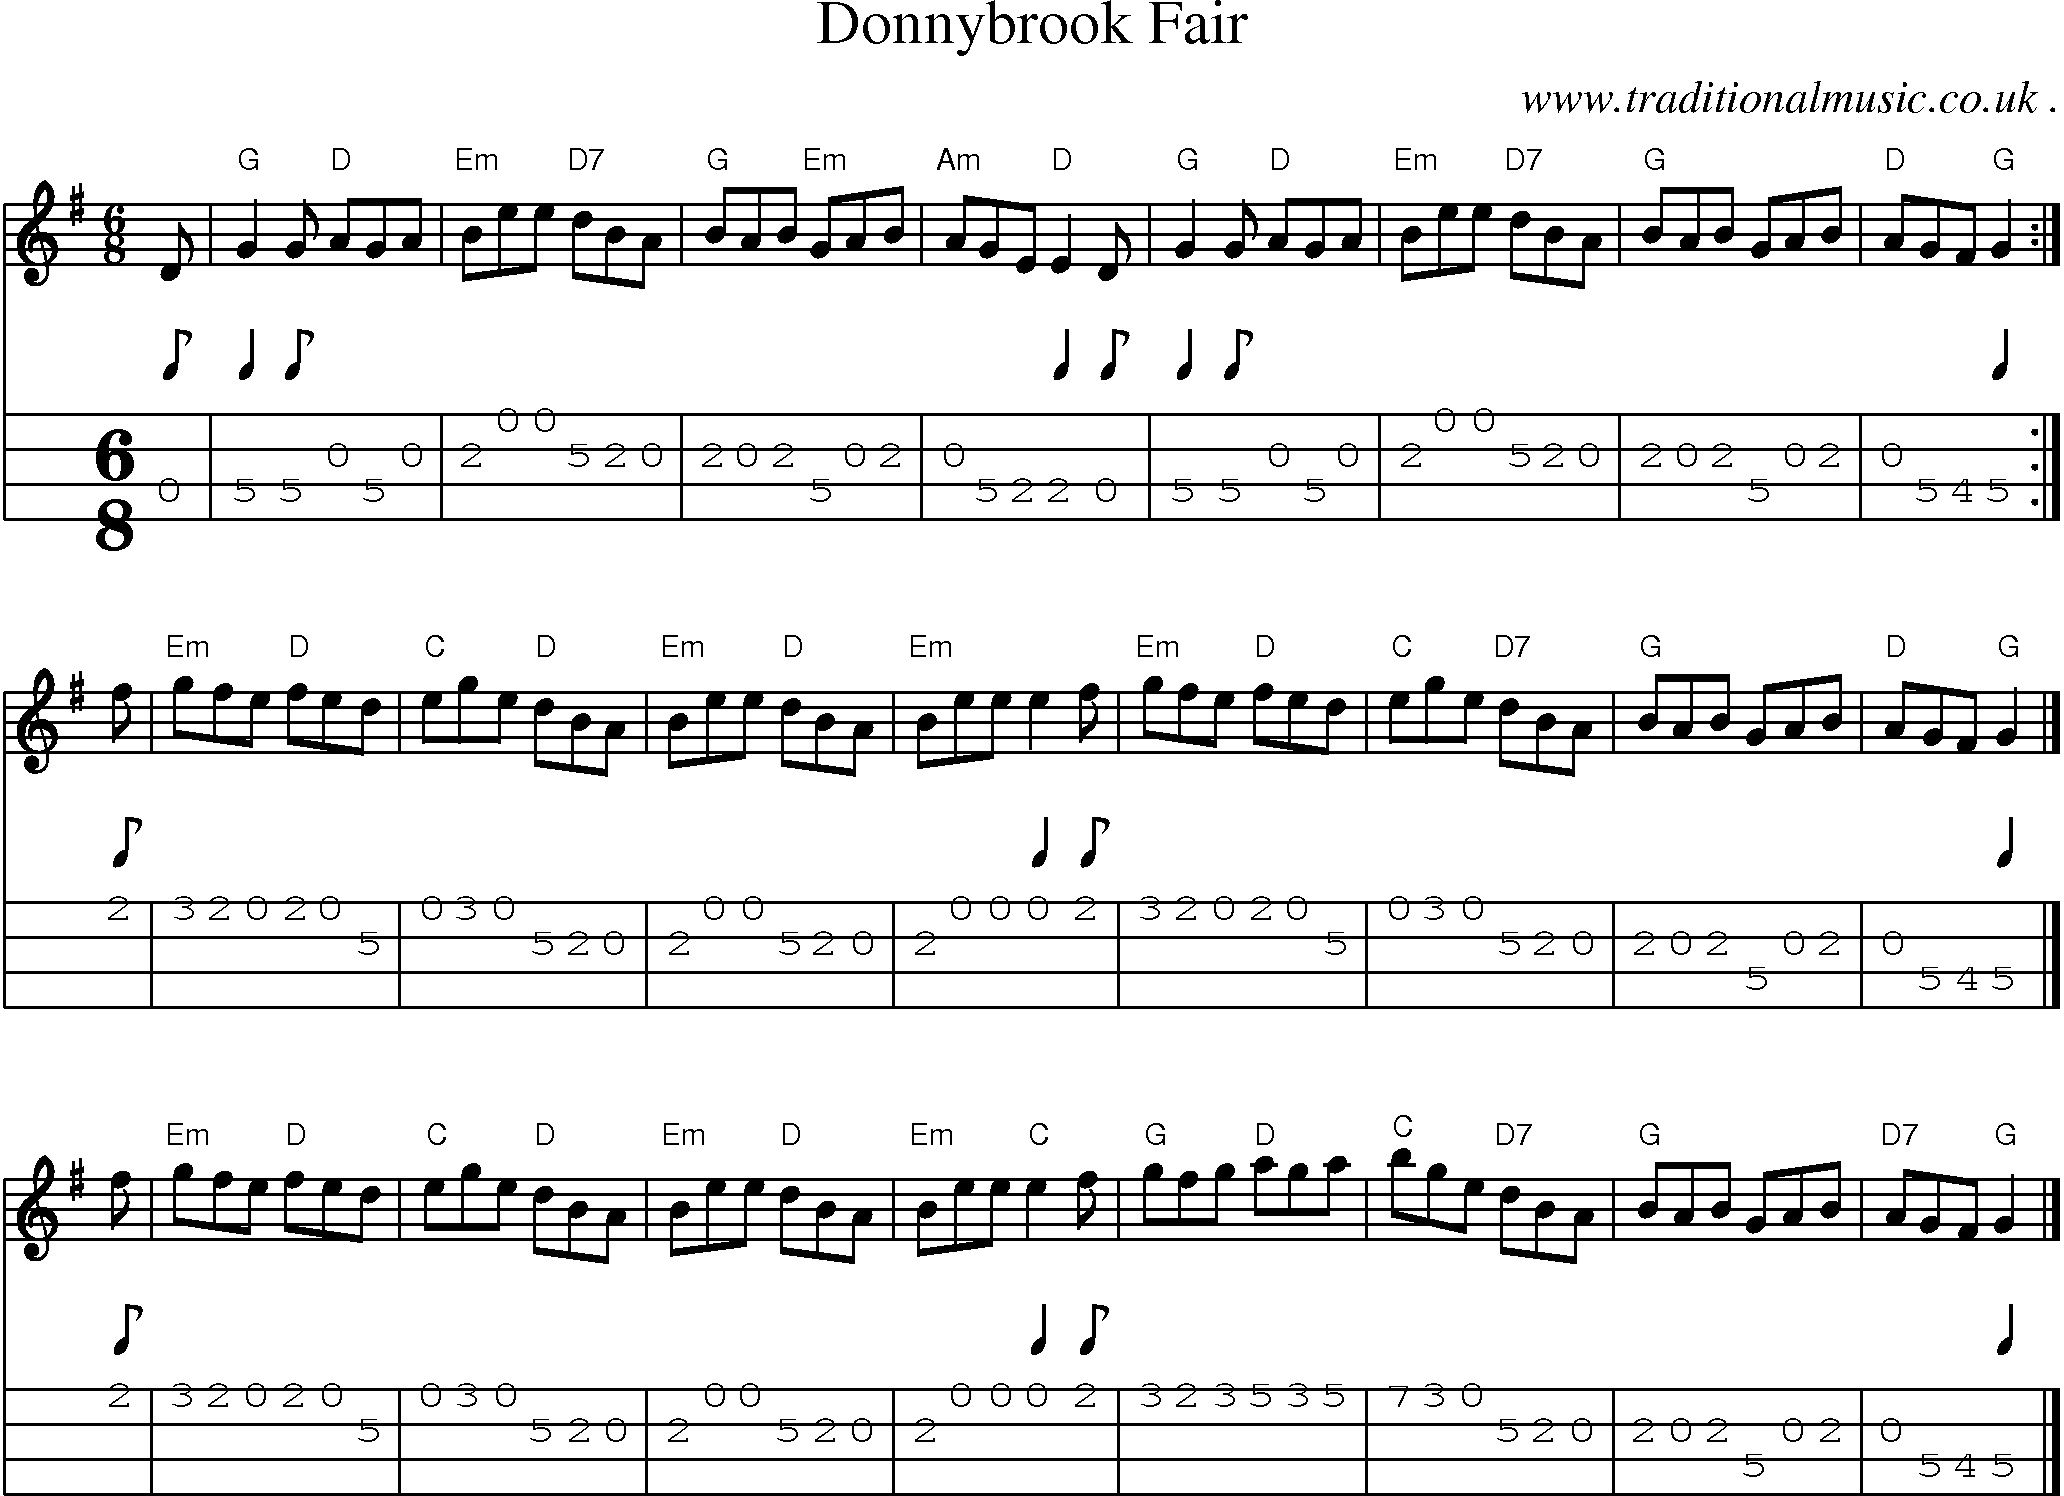 Sheet-music  score, Chords and Mandolin Tabs for Donnybrook Fair